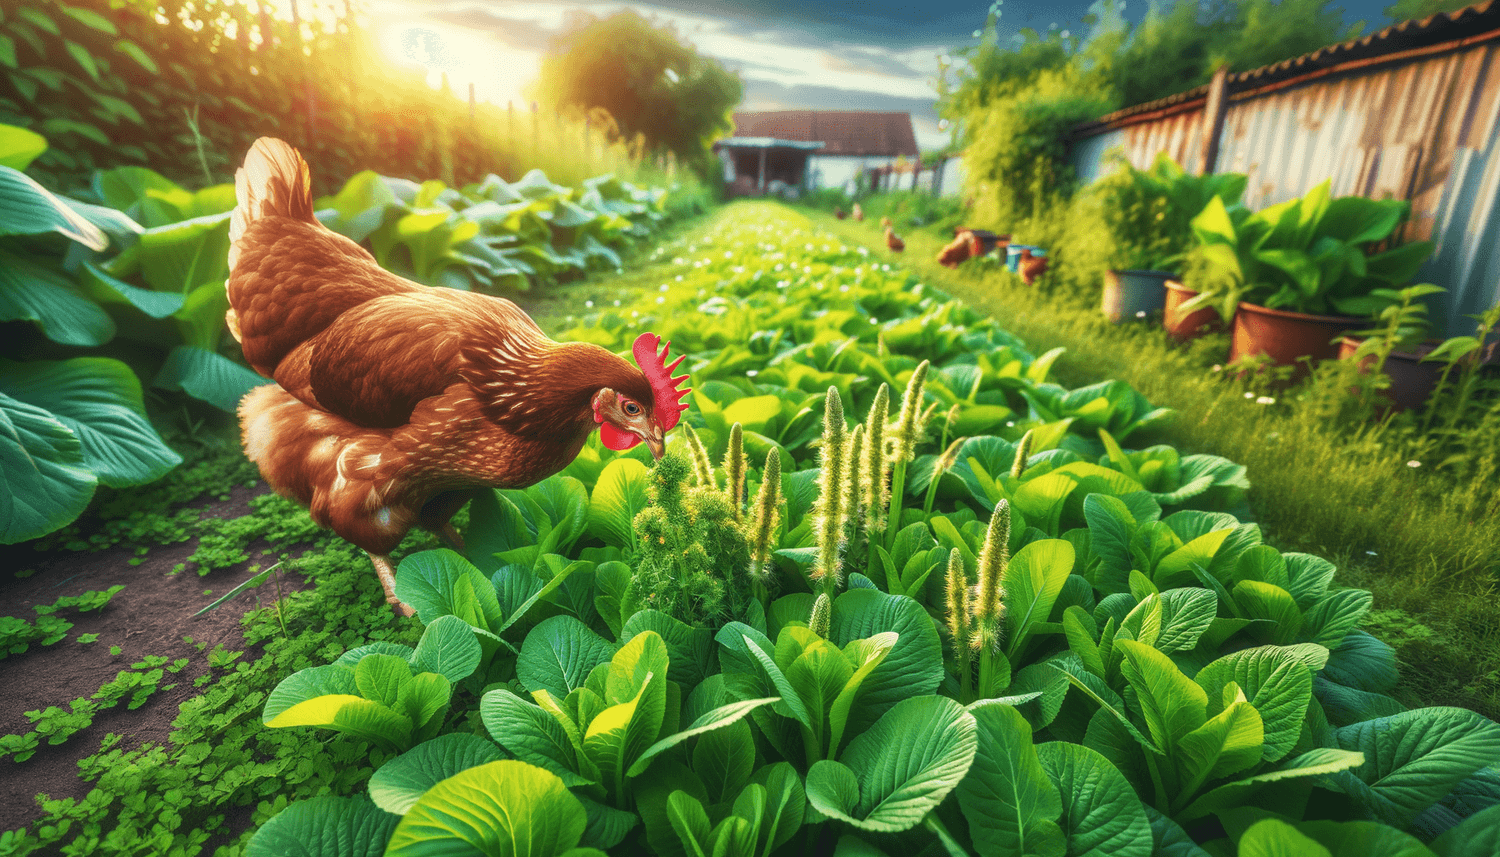 Can Chickens Eat Plantain Weeds?